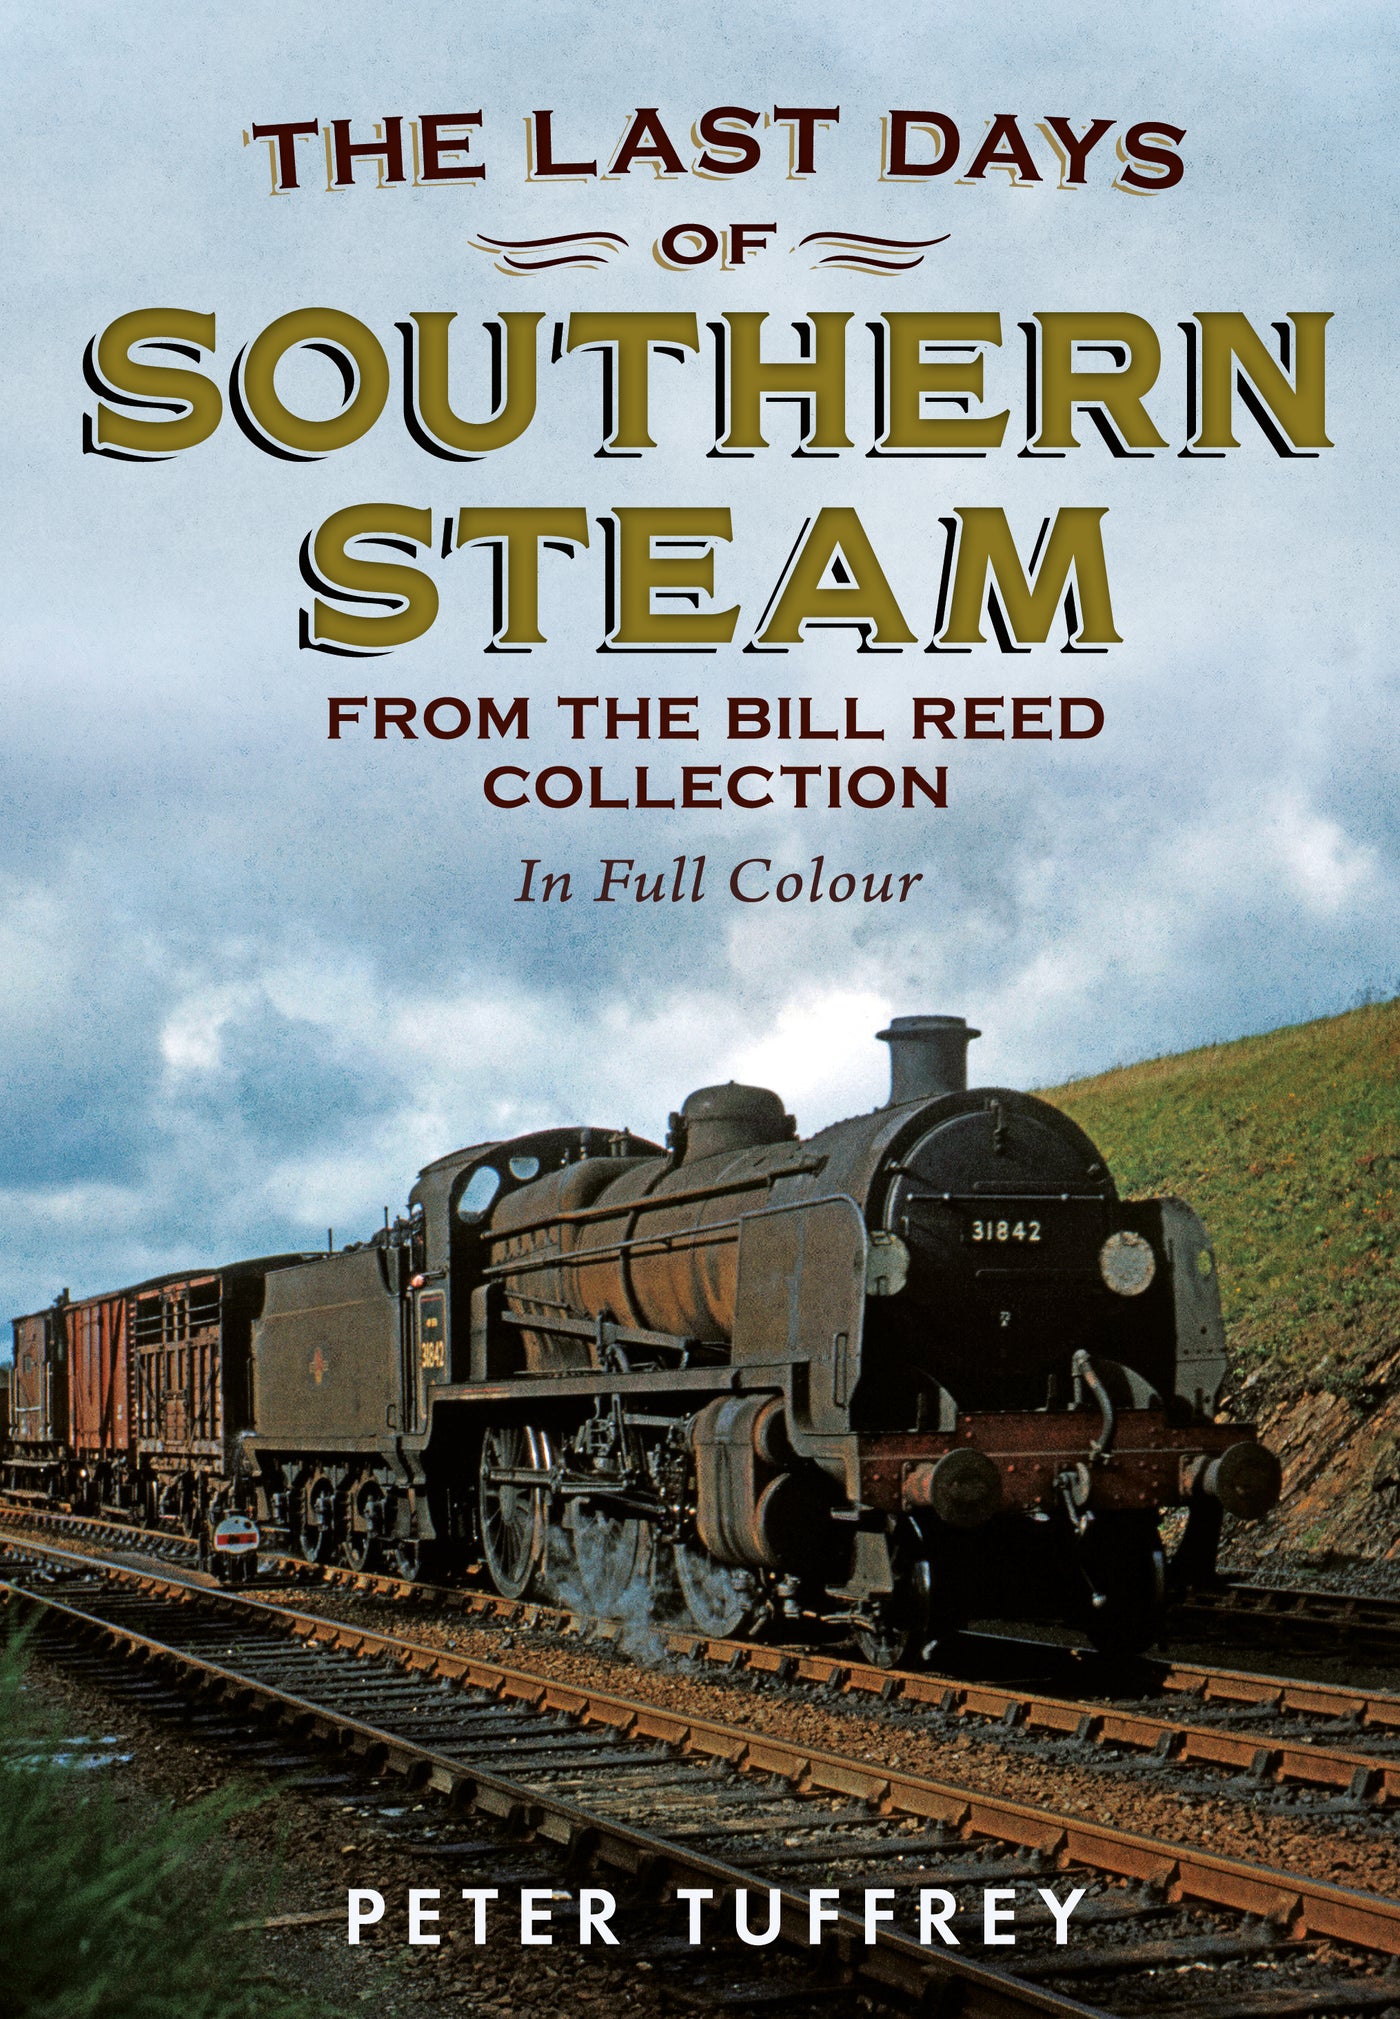 The Last Days of Southern Steam from the Bill Reed Collection